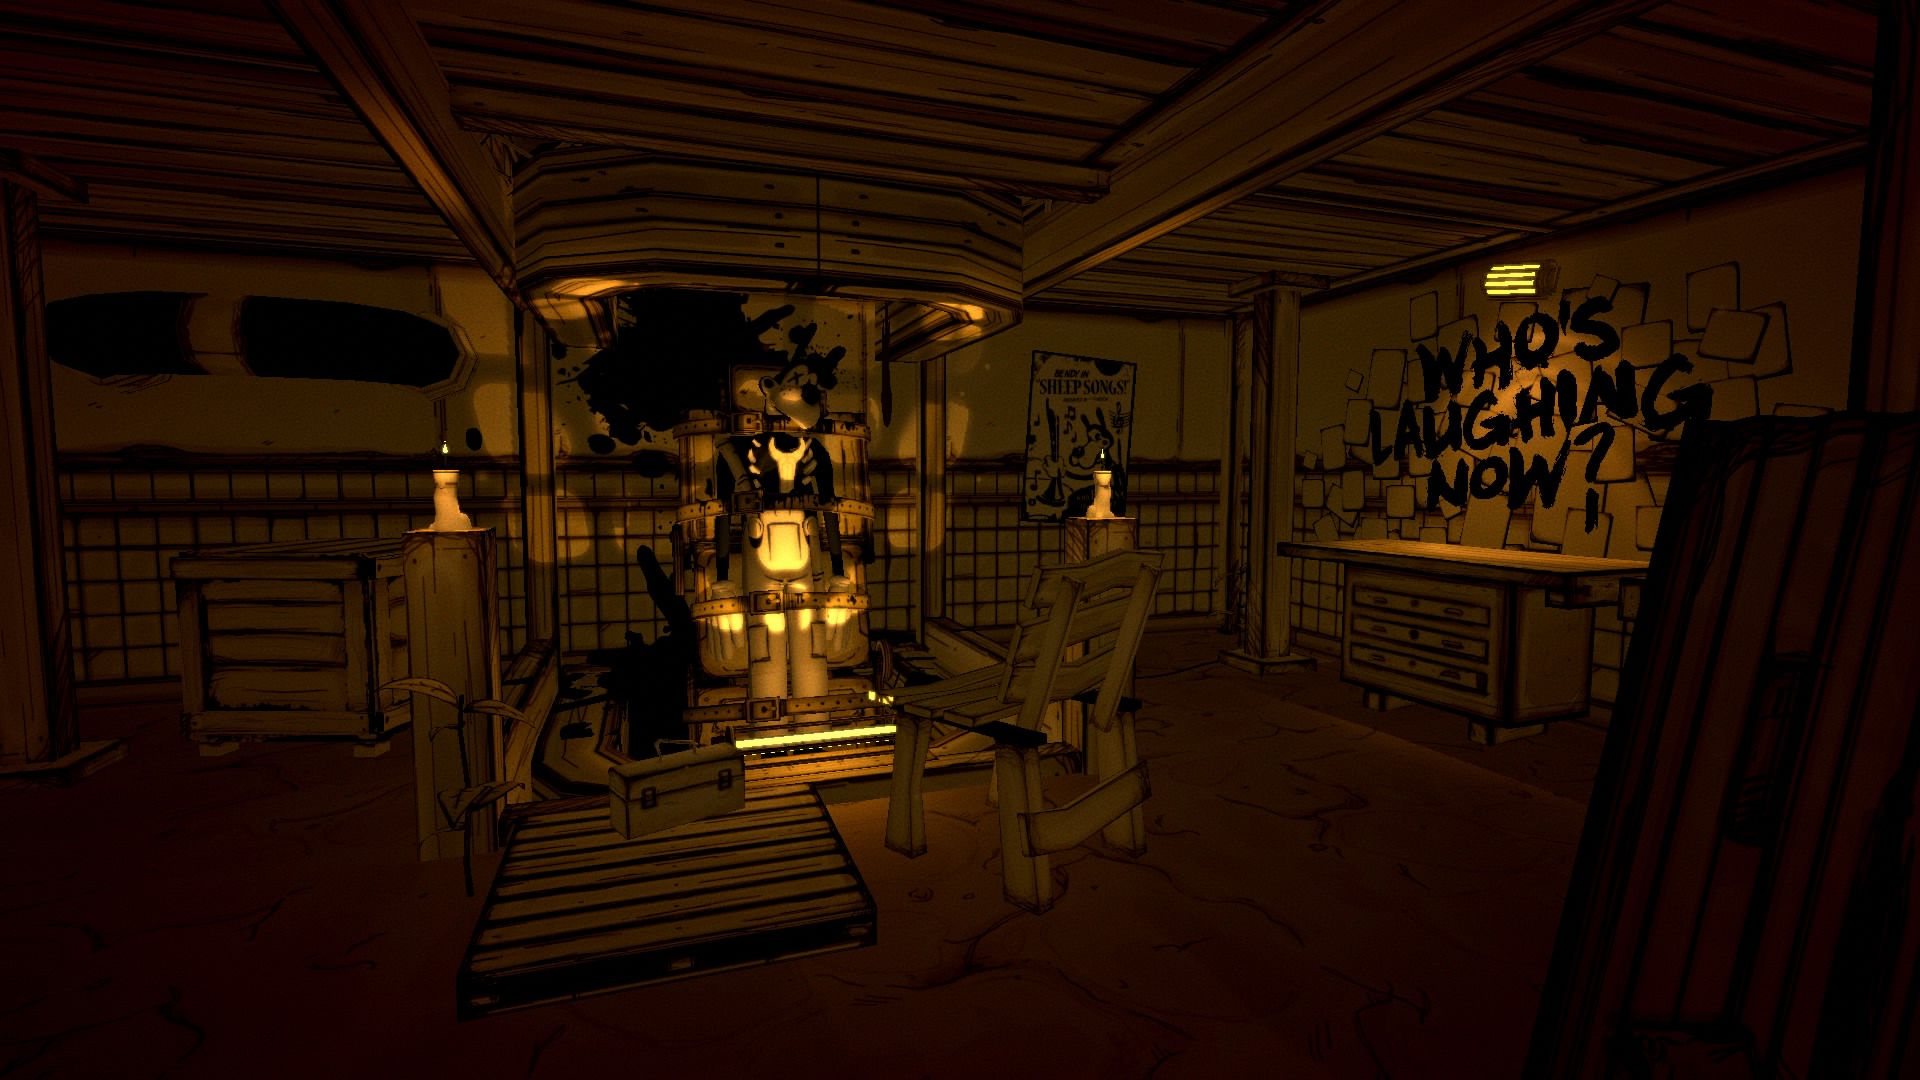 Bendy and the Ink Machine Review